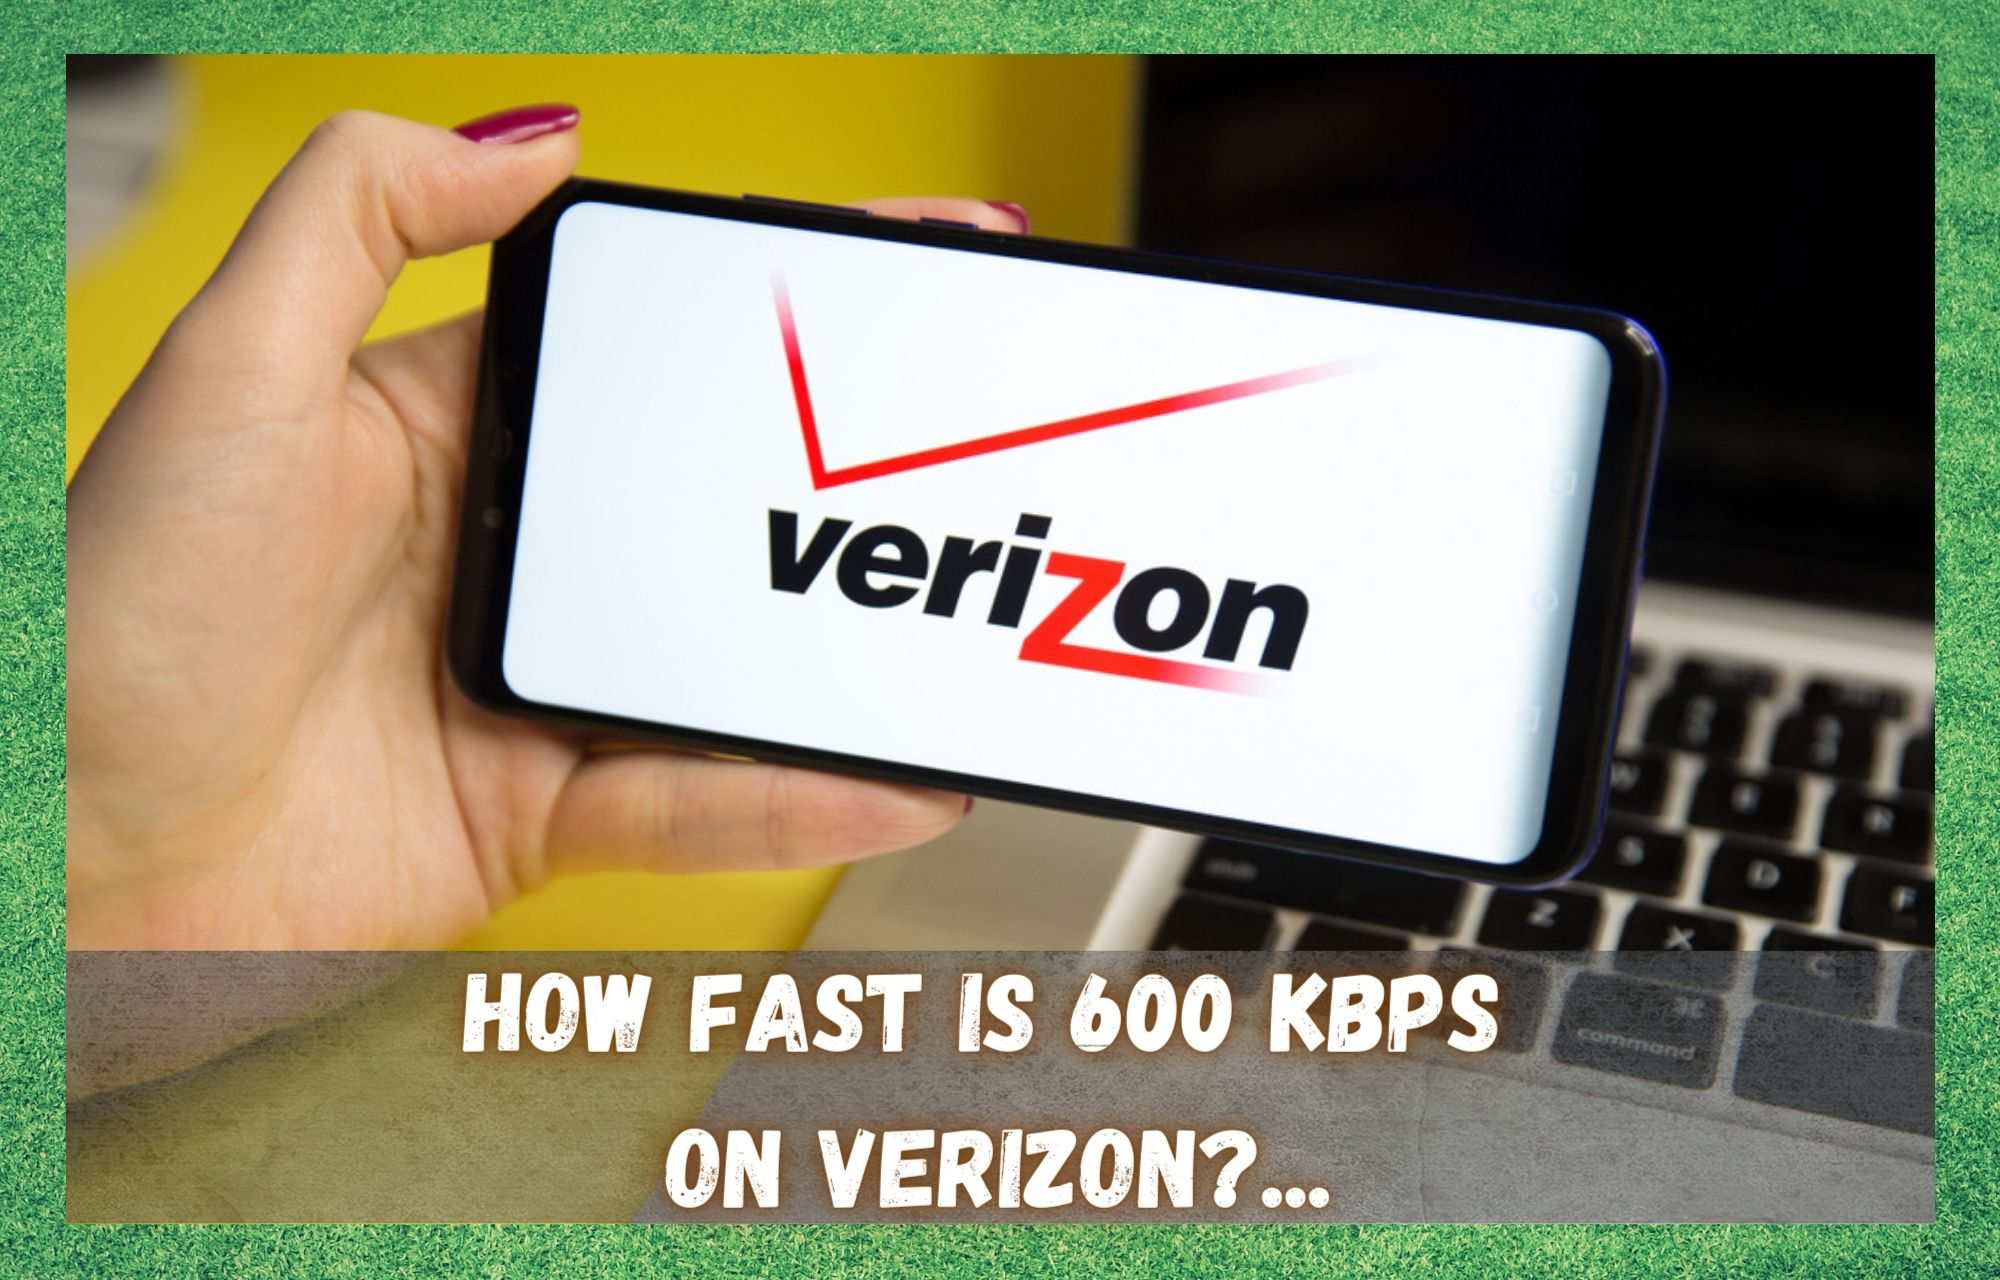 Verizon - How Fast Is 600 Kbps? (Explained) - Internet Access Guide